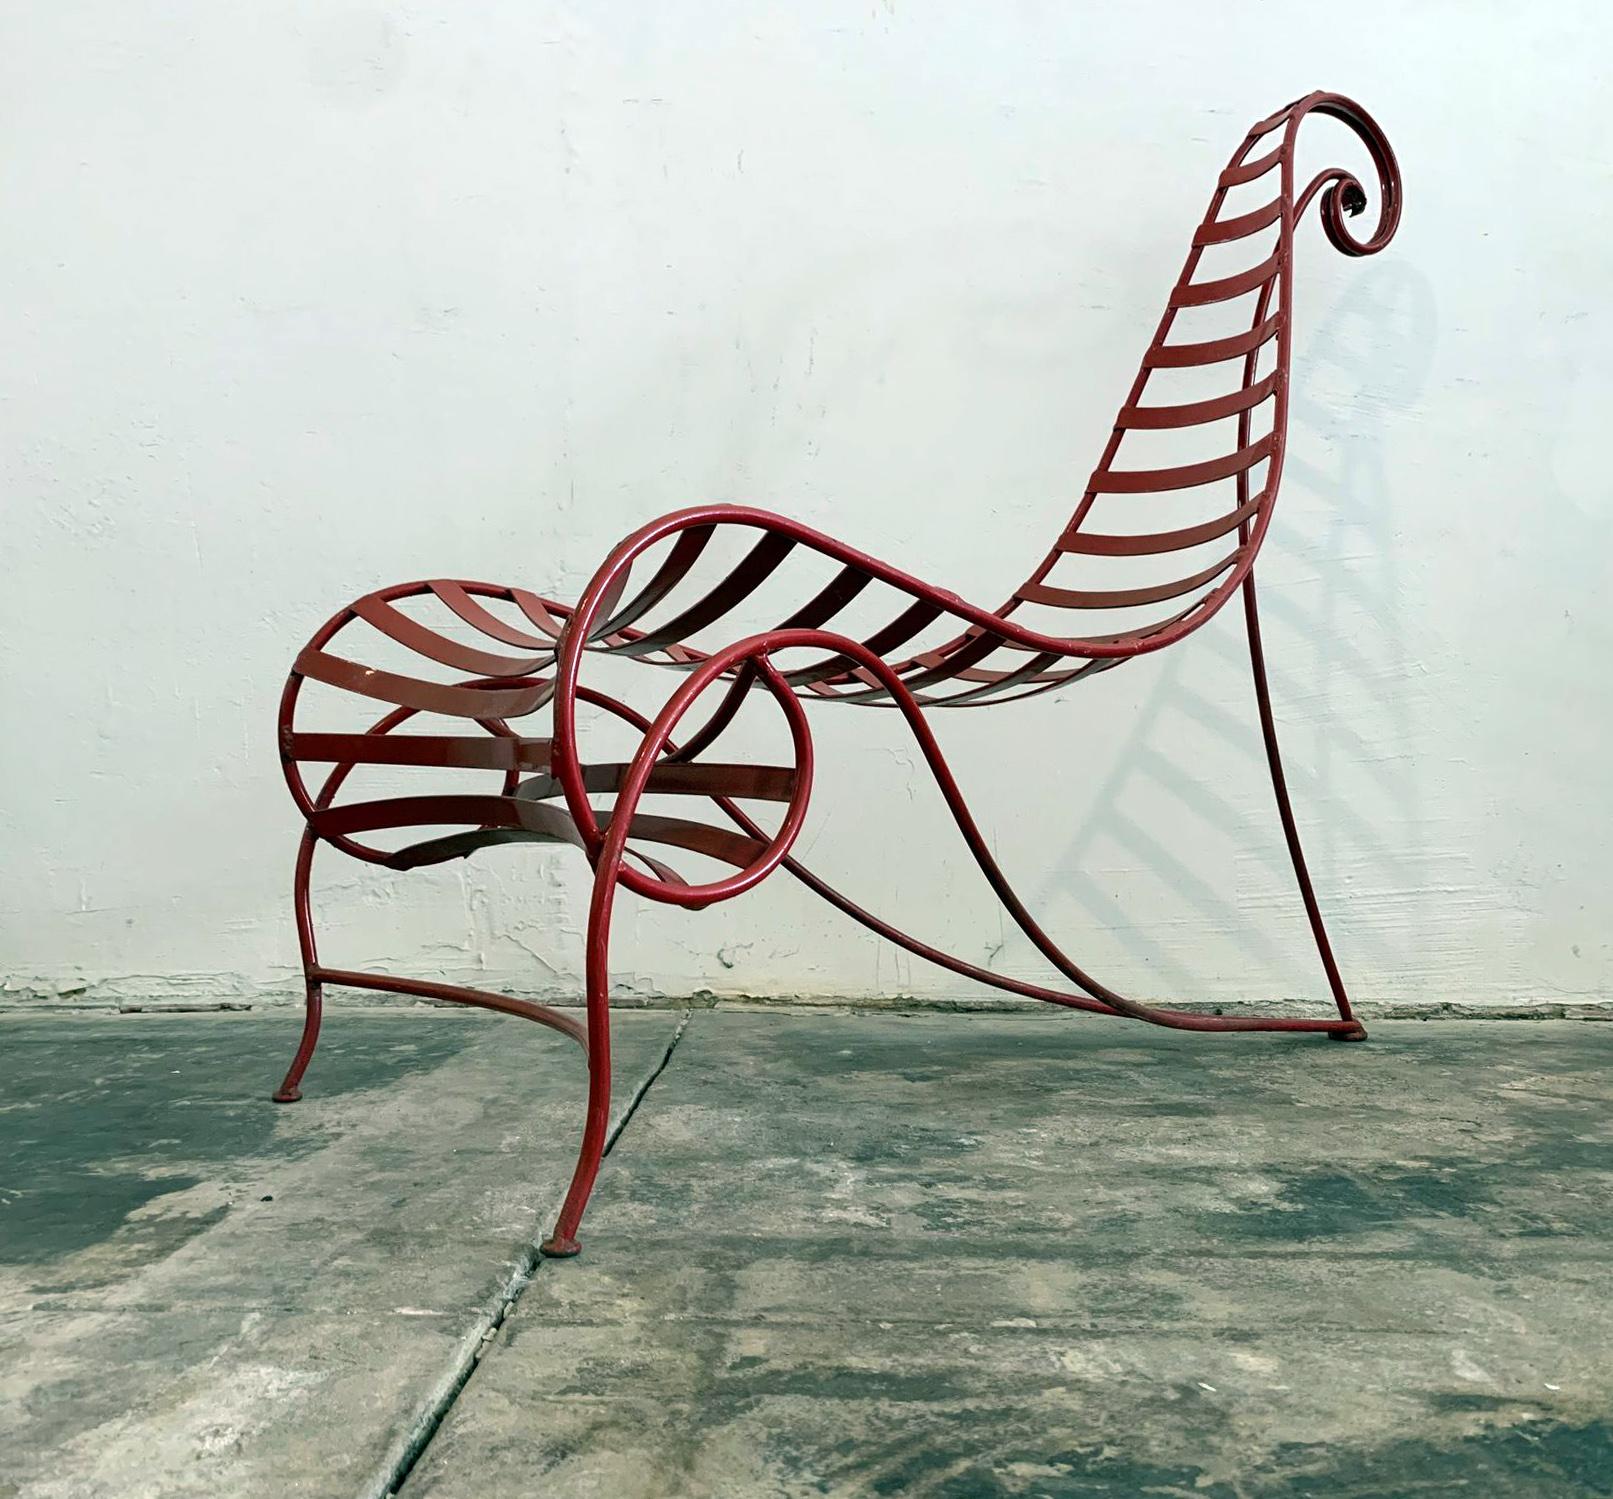 Available right now we have this stunning candy-cane red spine chair attributed to Andre Dubreuil. This post modern whimsical chair has a killer shape and for being iron is surprisingly comfortable.

Many people opt for keeping these beautiful